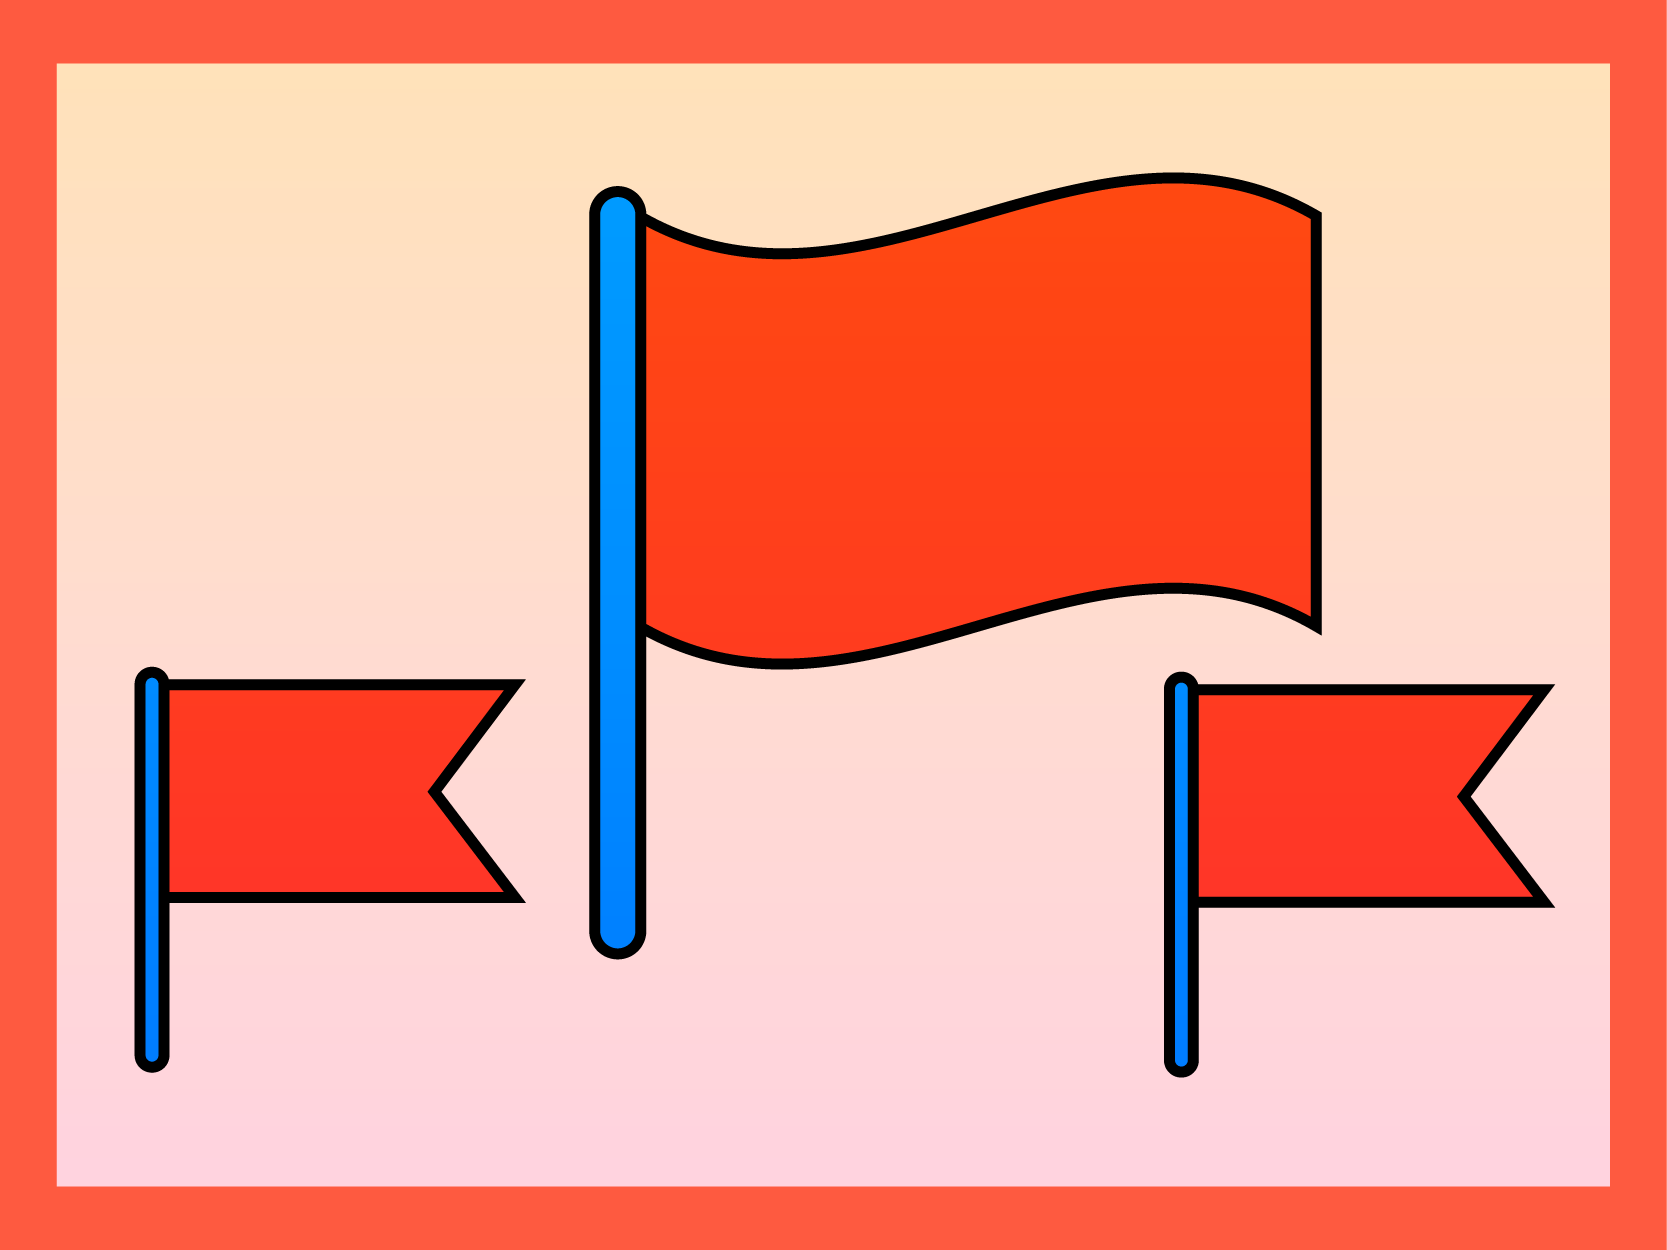 3 red flags on red background 4x3 border